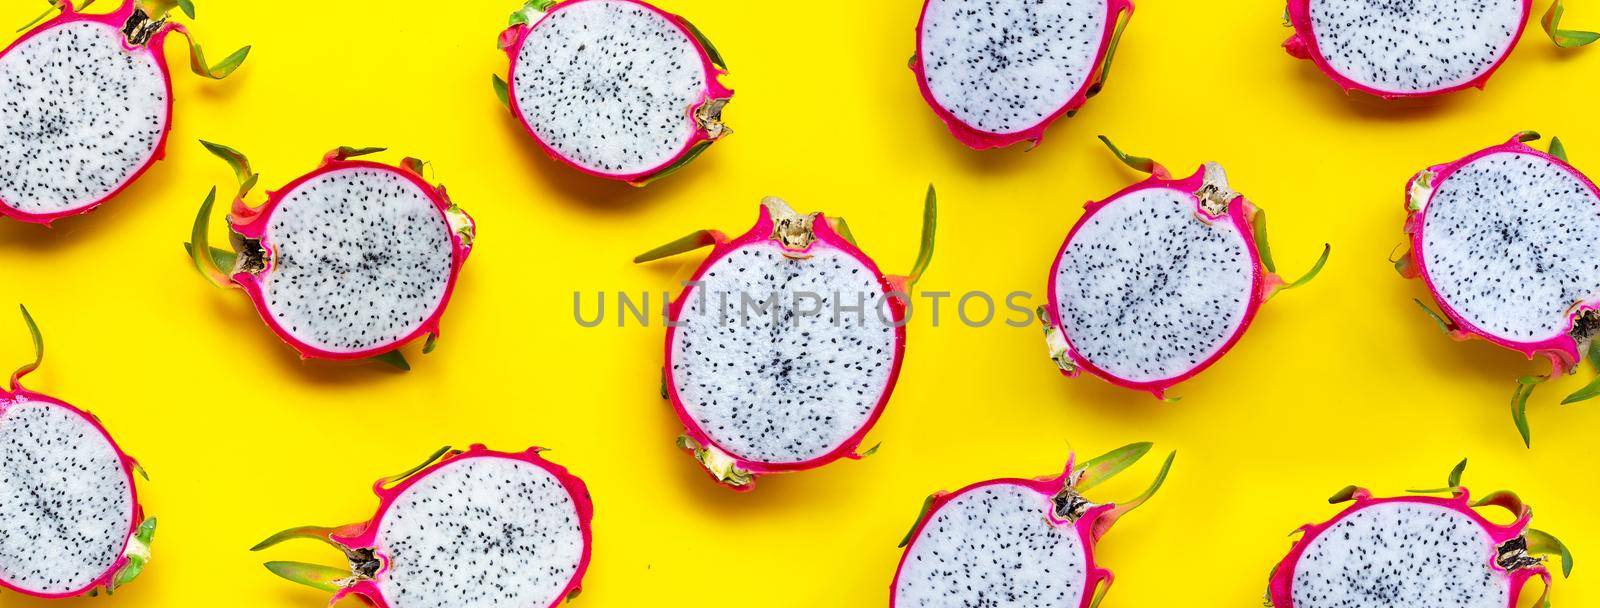 Dragon fruit or pitaya on yellow background. Delicious tropical exotic fruit. Top view